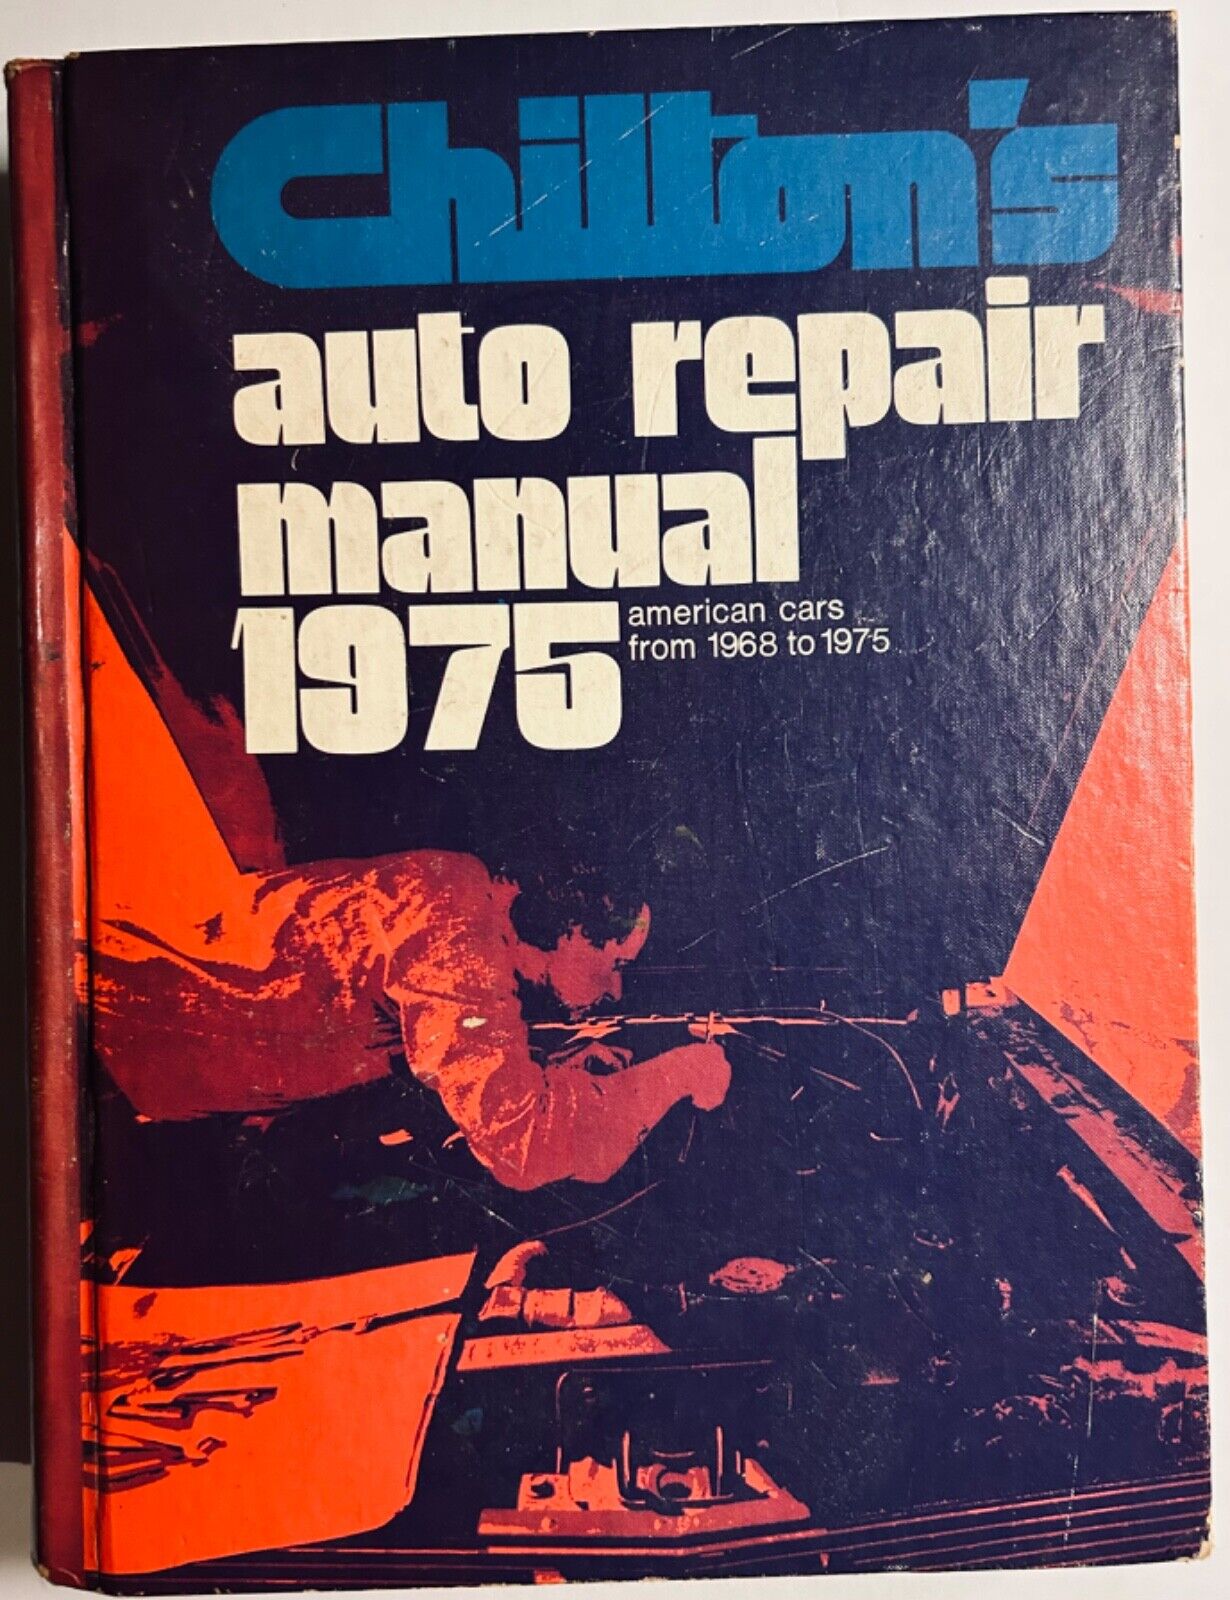 Vintage Chilton\'s Auto Repair Manual, American Cars from 1968 to 1975